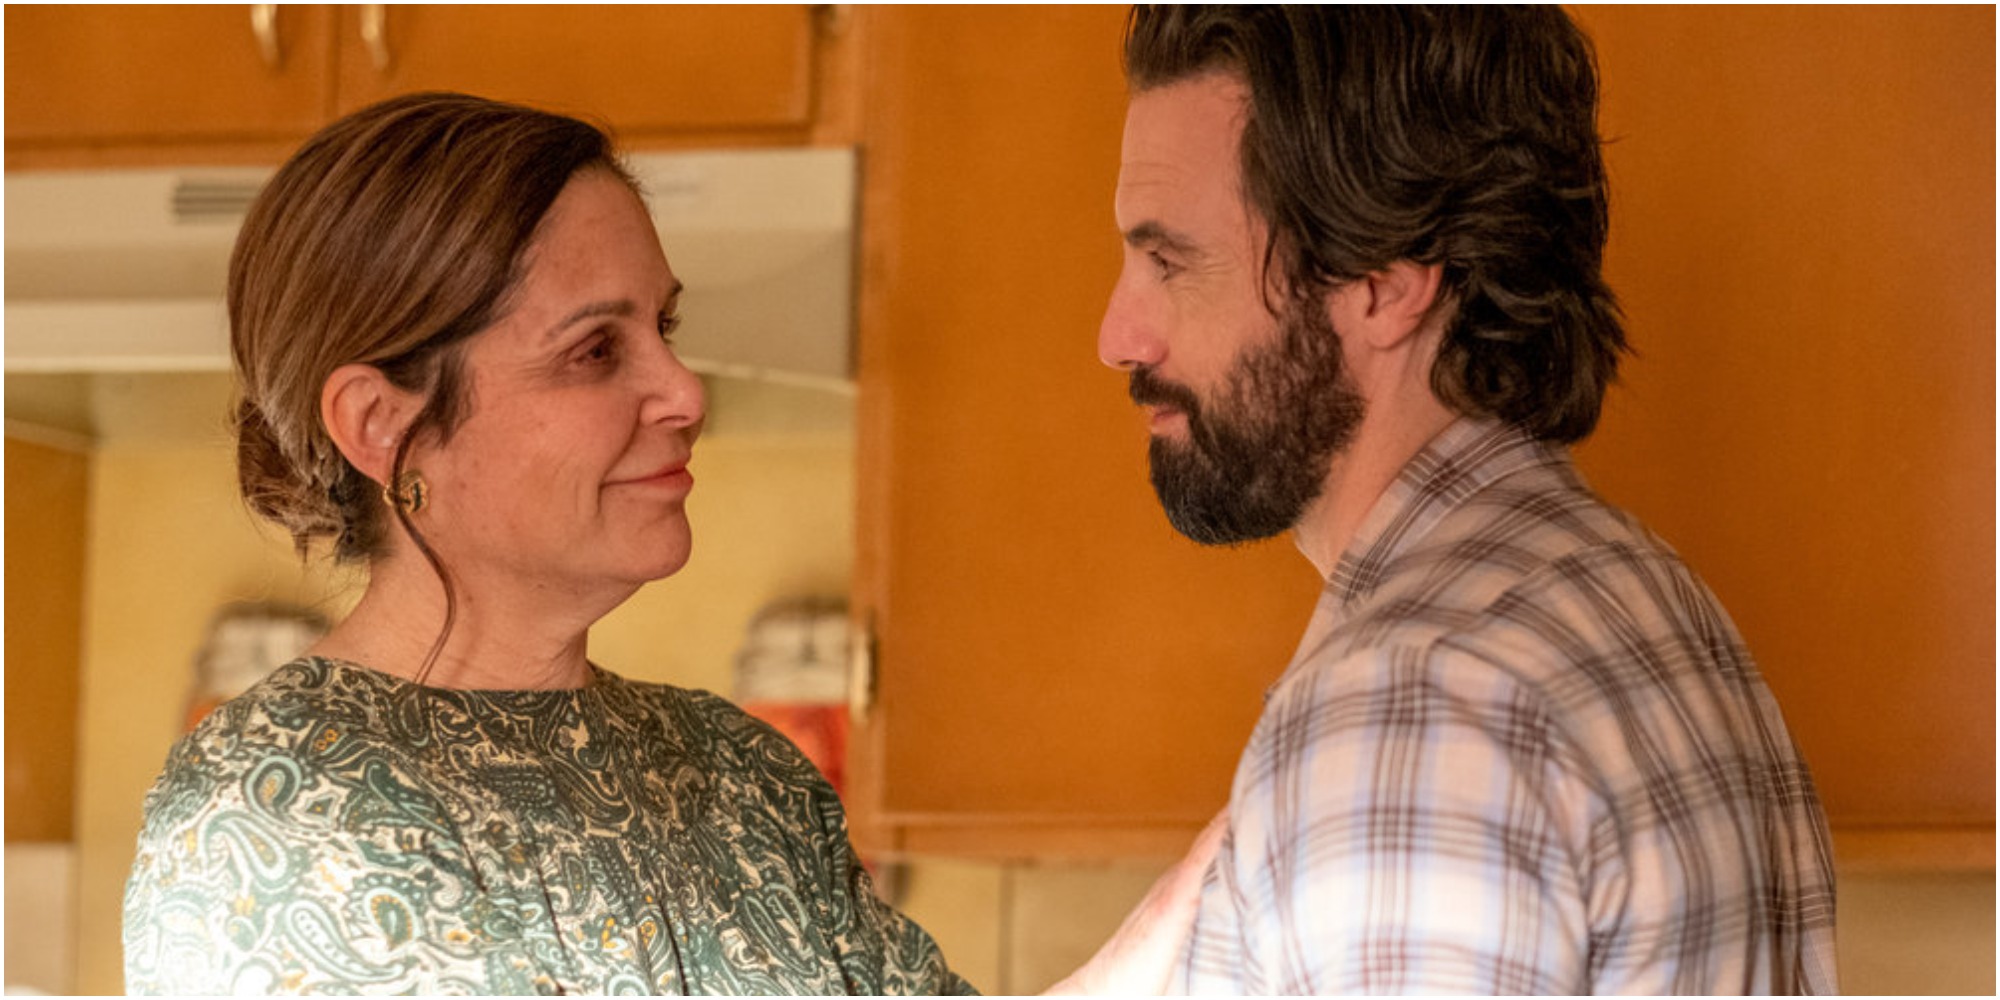 Laura Niemi and Milo Ventimiglia on the set of This Is Us.